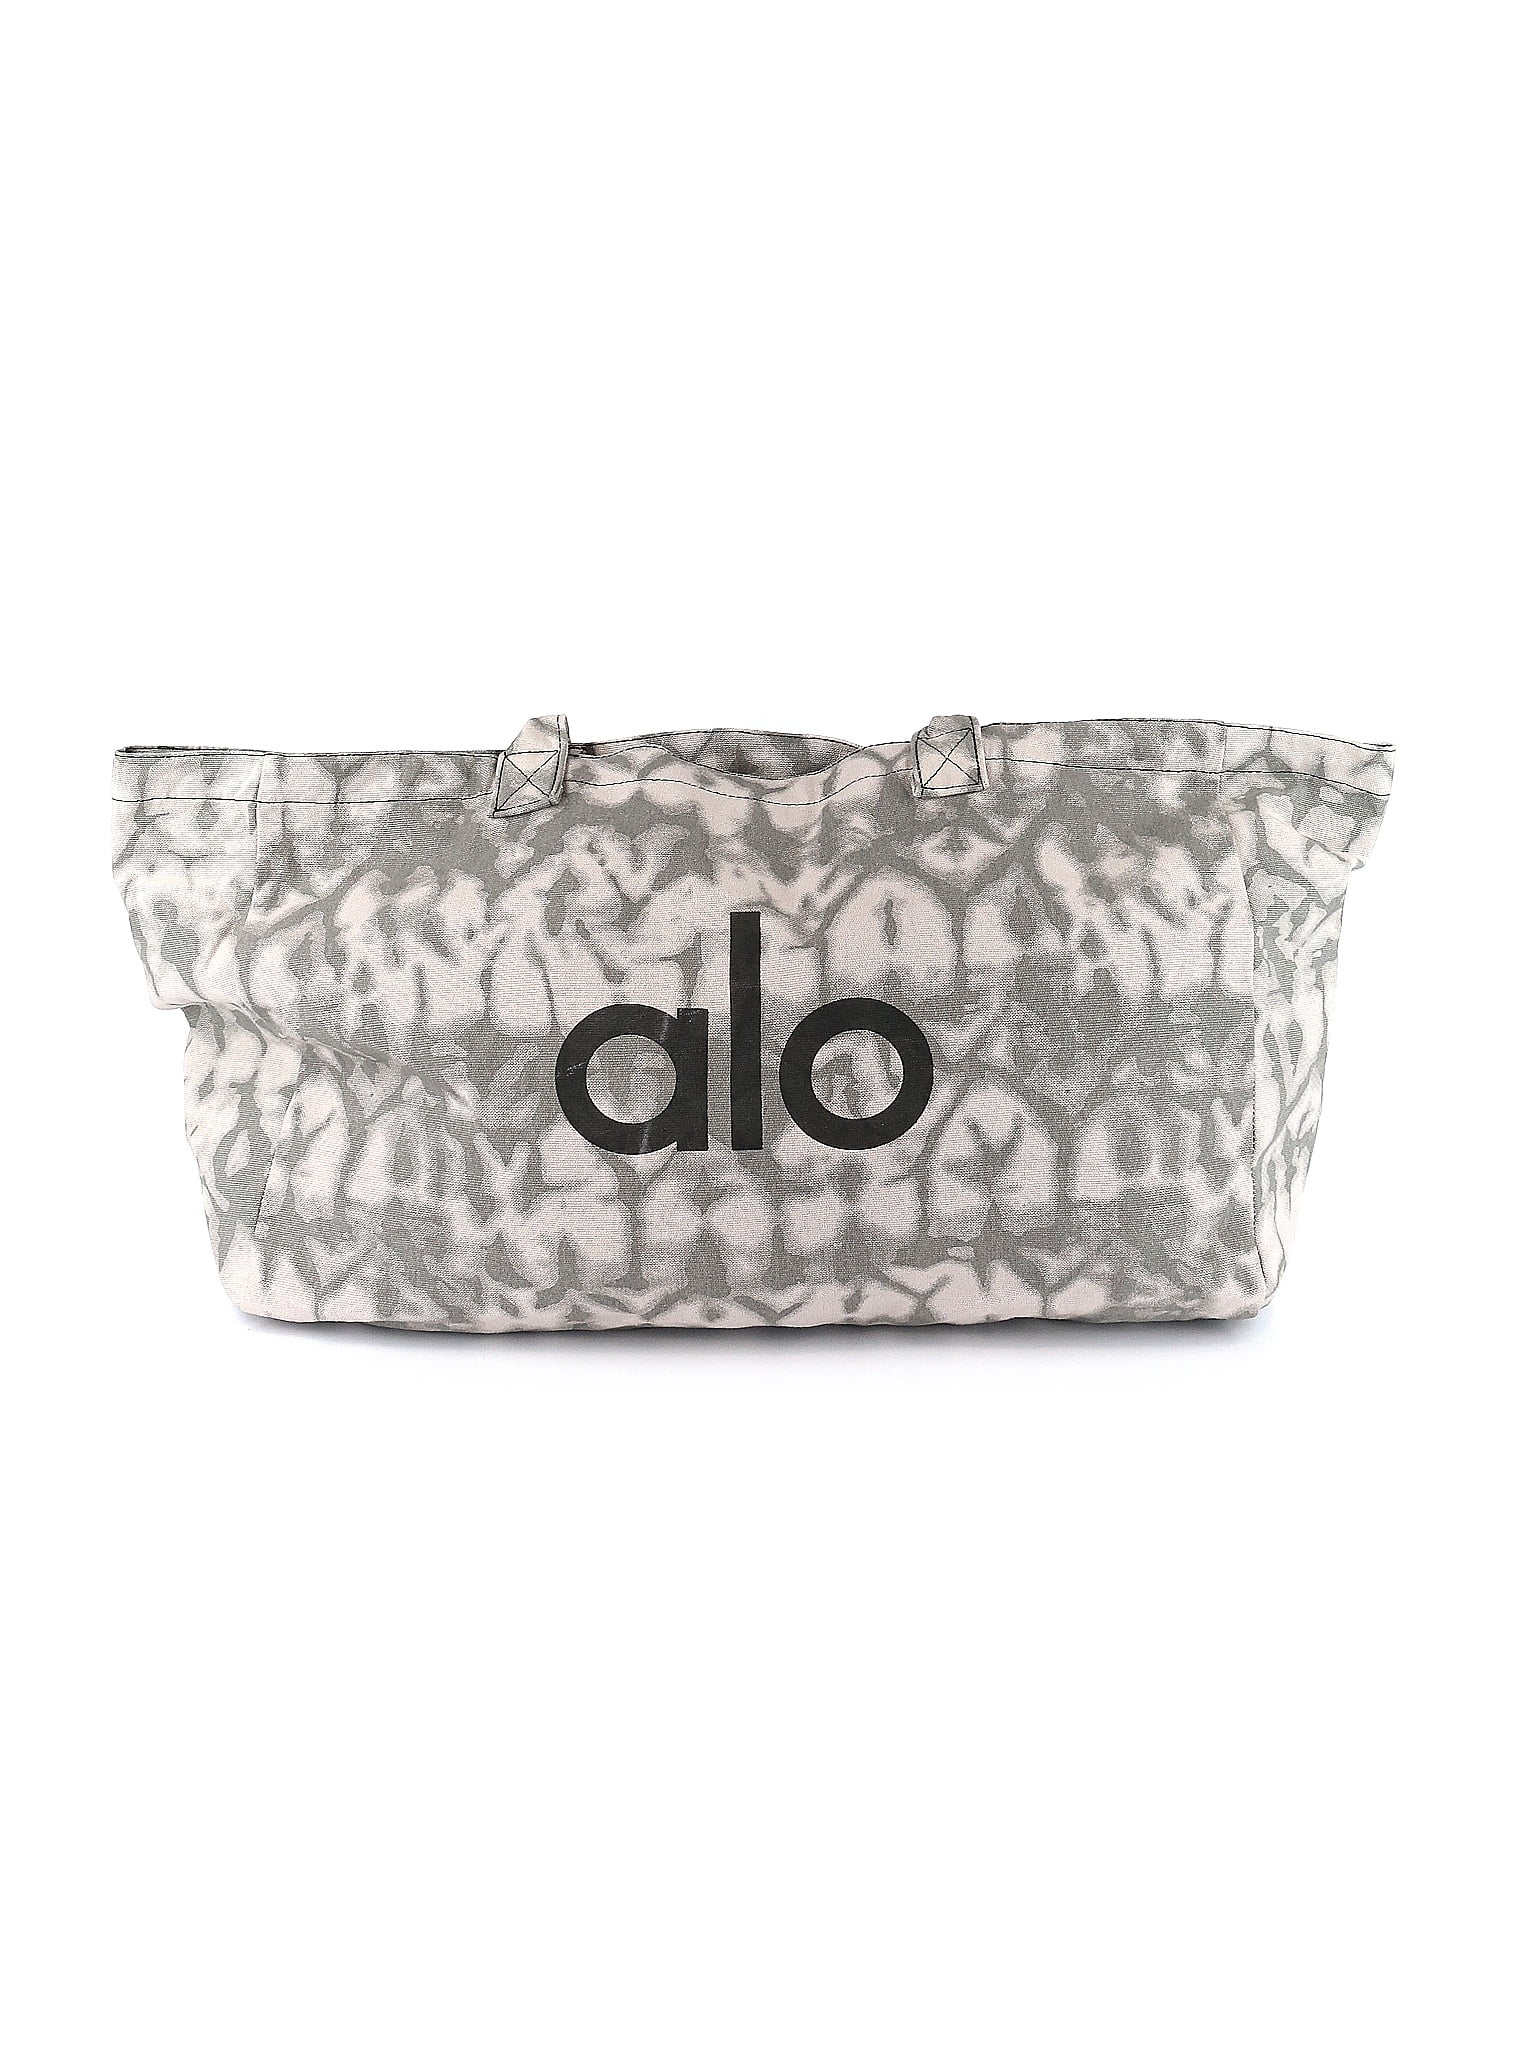 Alo Yoga Totes On Sale Up To 90% Off Retail